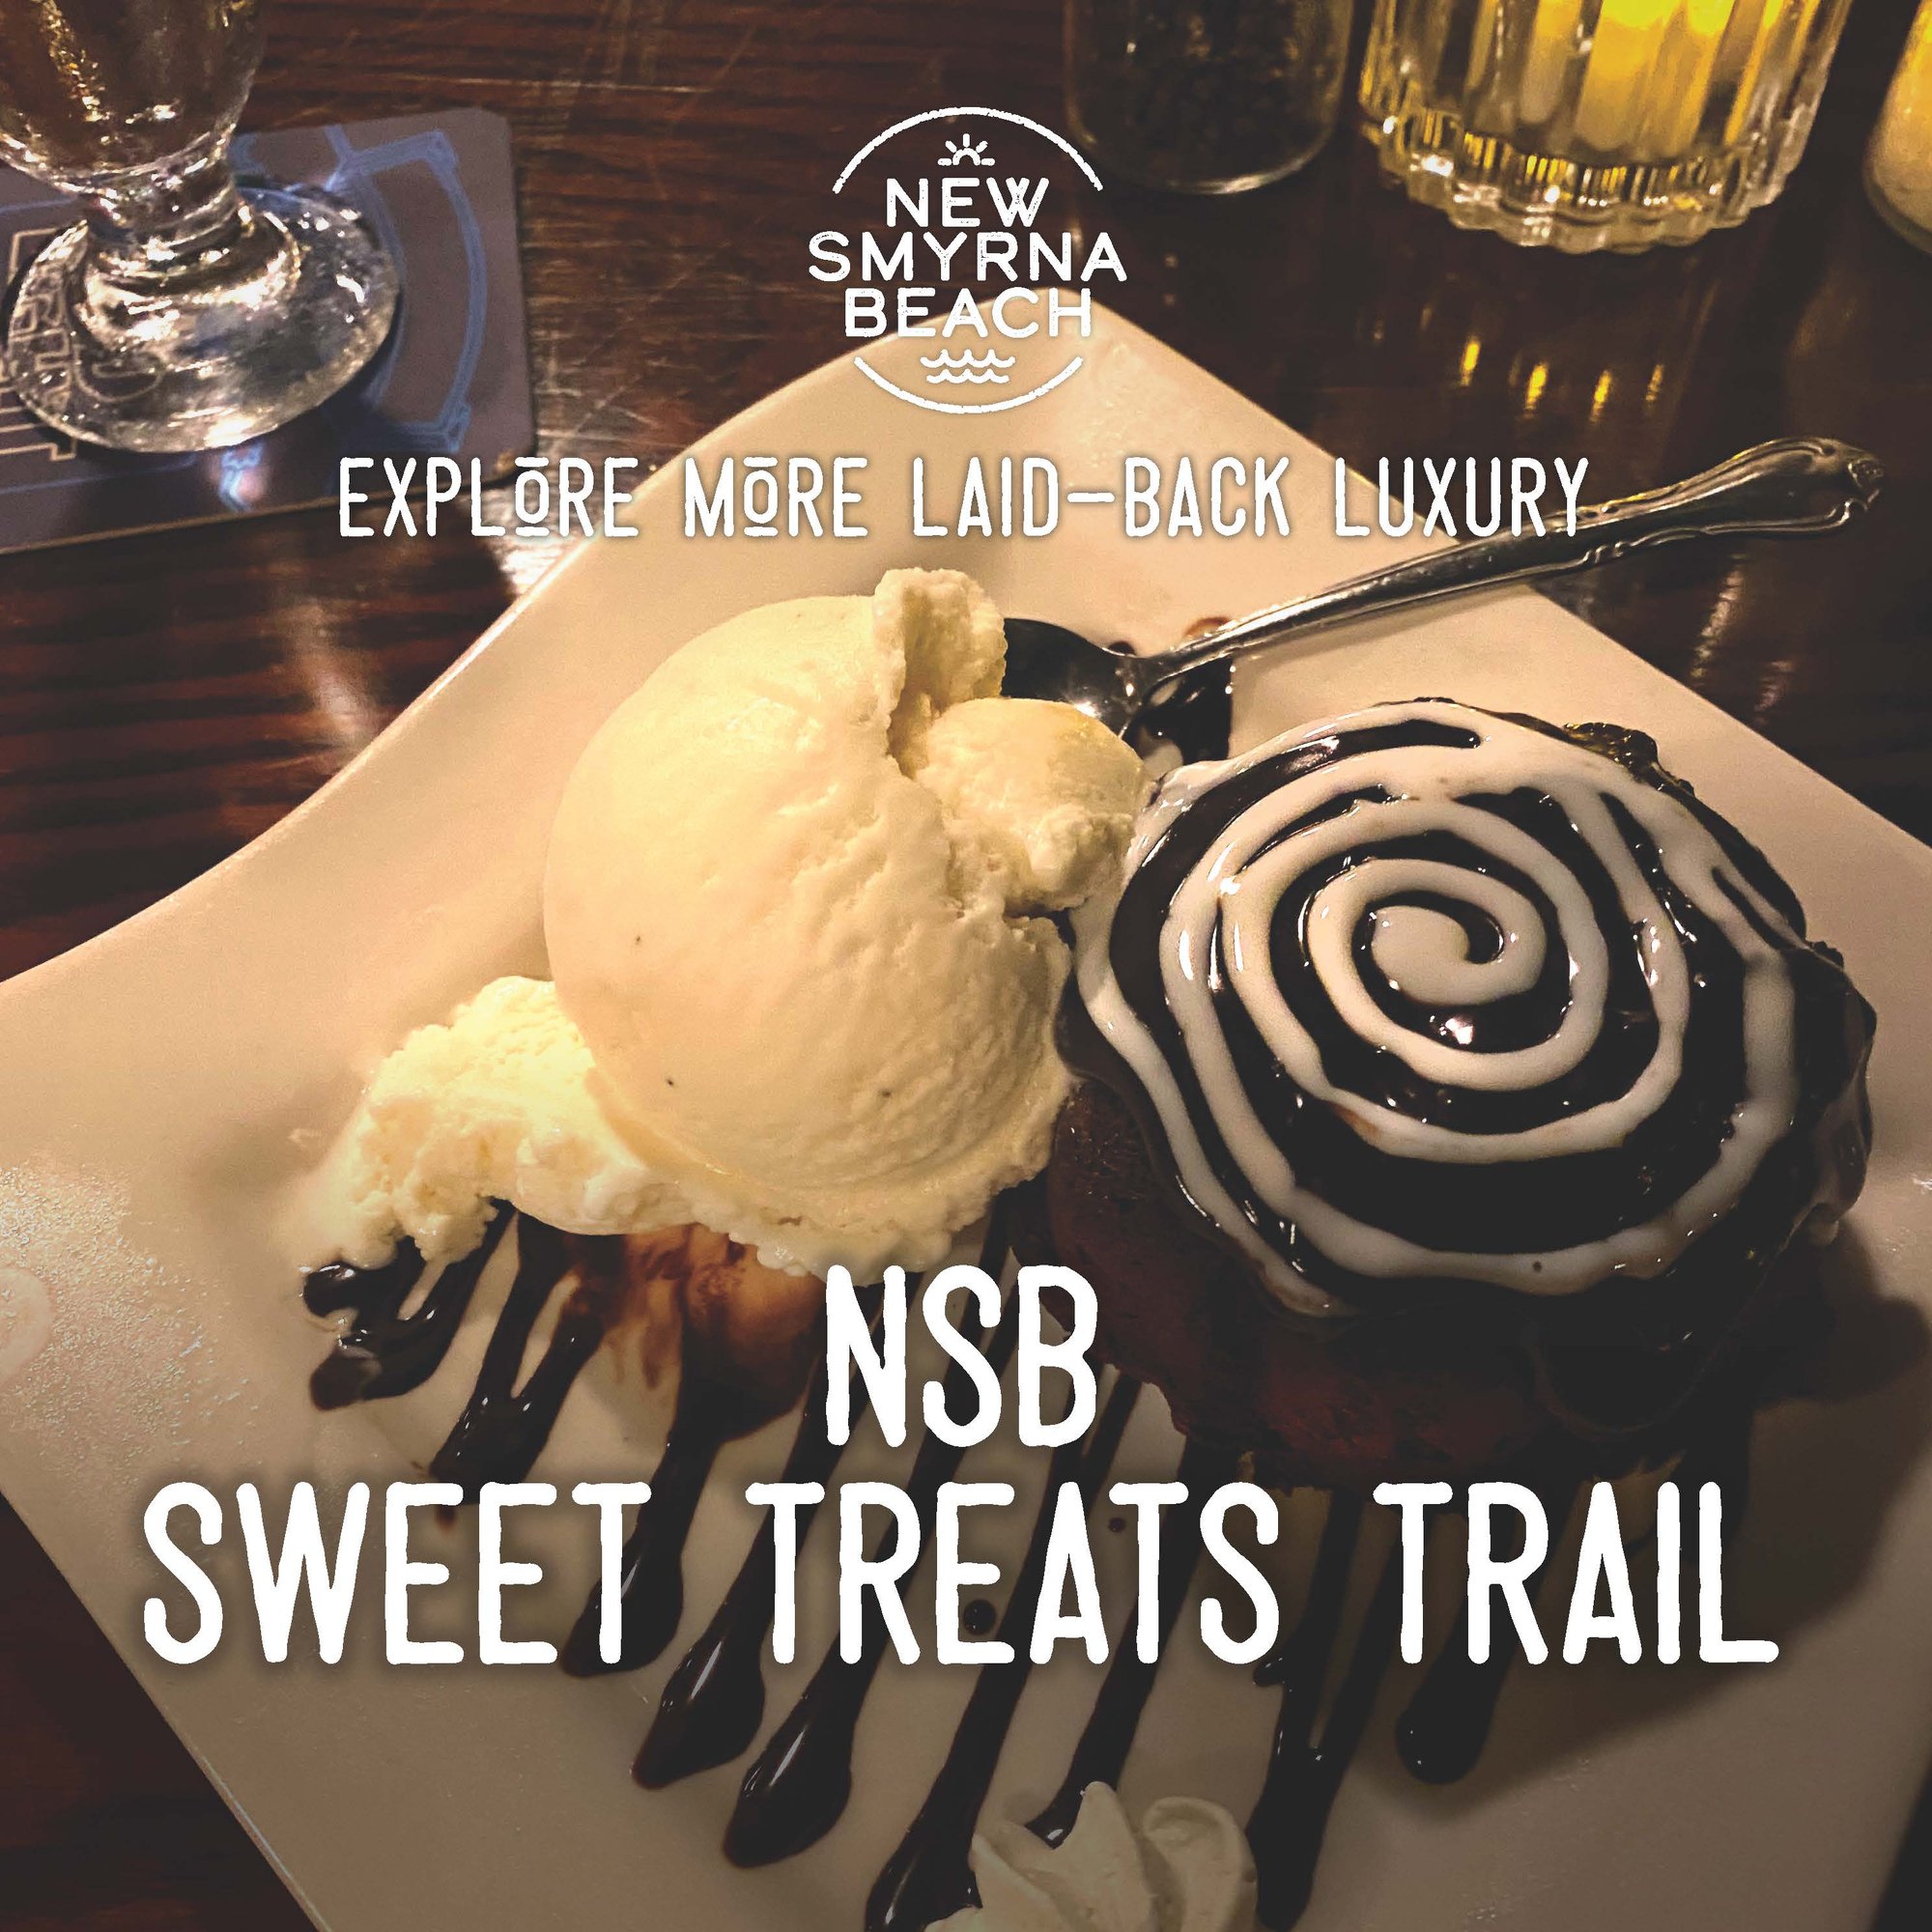 NSB-11473 - NSB Trails Program FY-2023 SWEETS Trail-JUNE-2023-2A (1)_Page_1